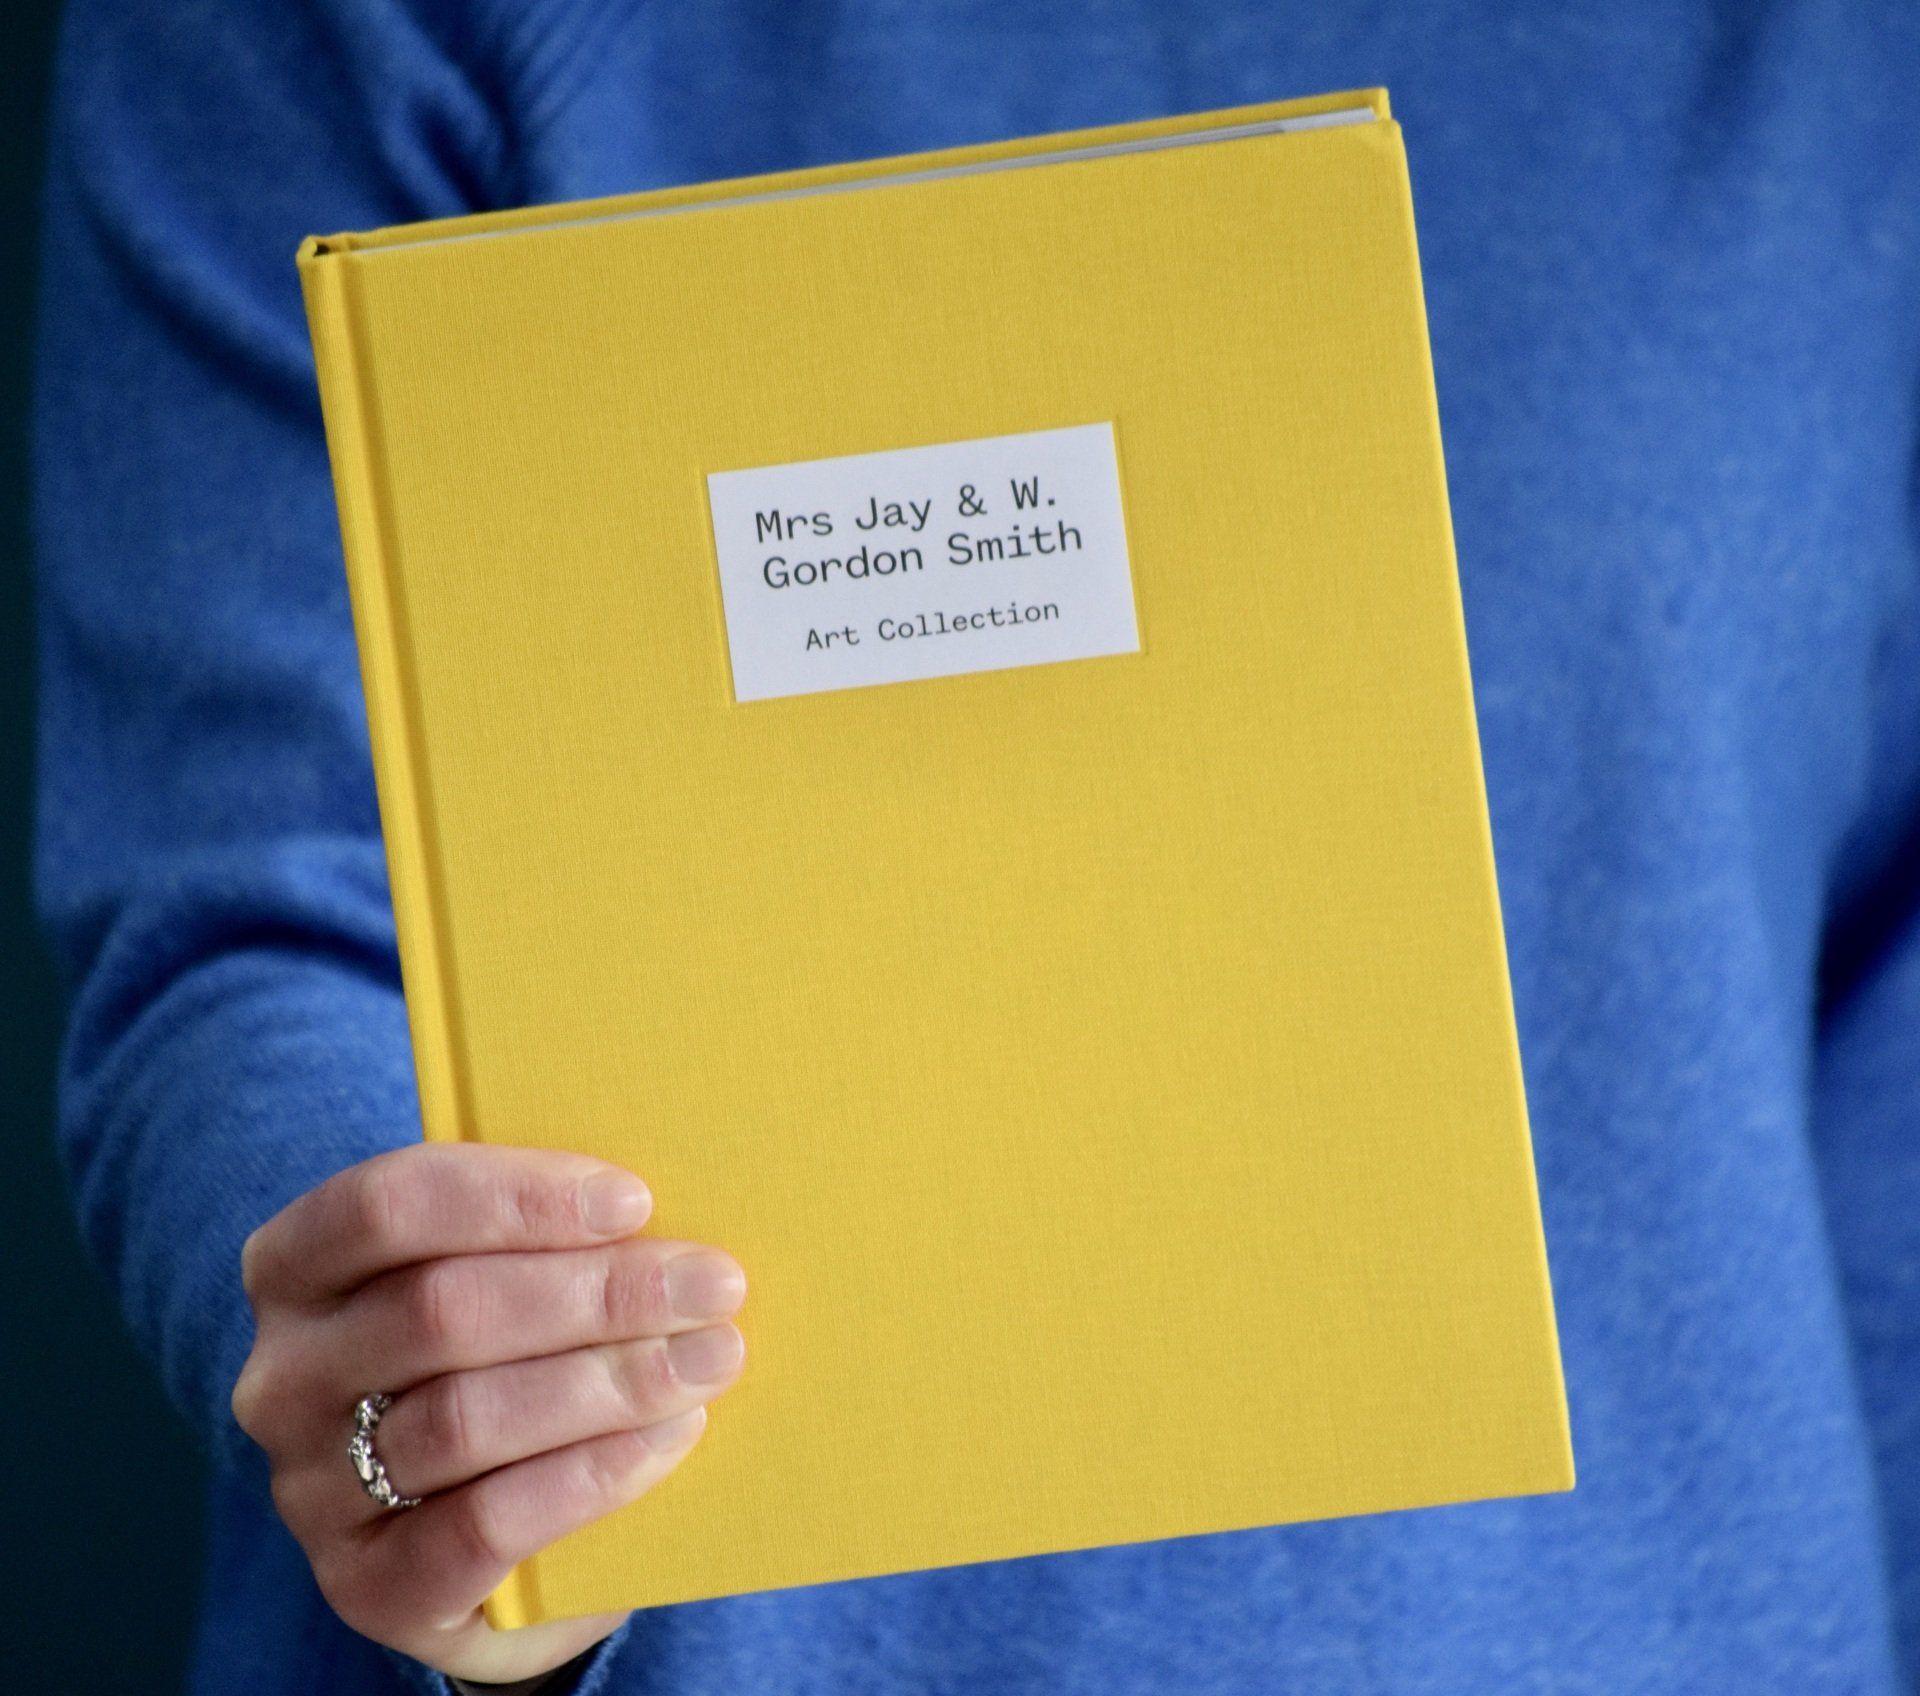 Photo of yellow book being held in front of blue background